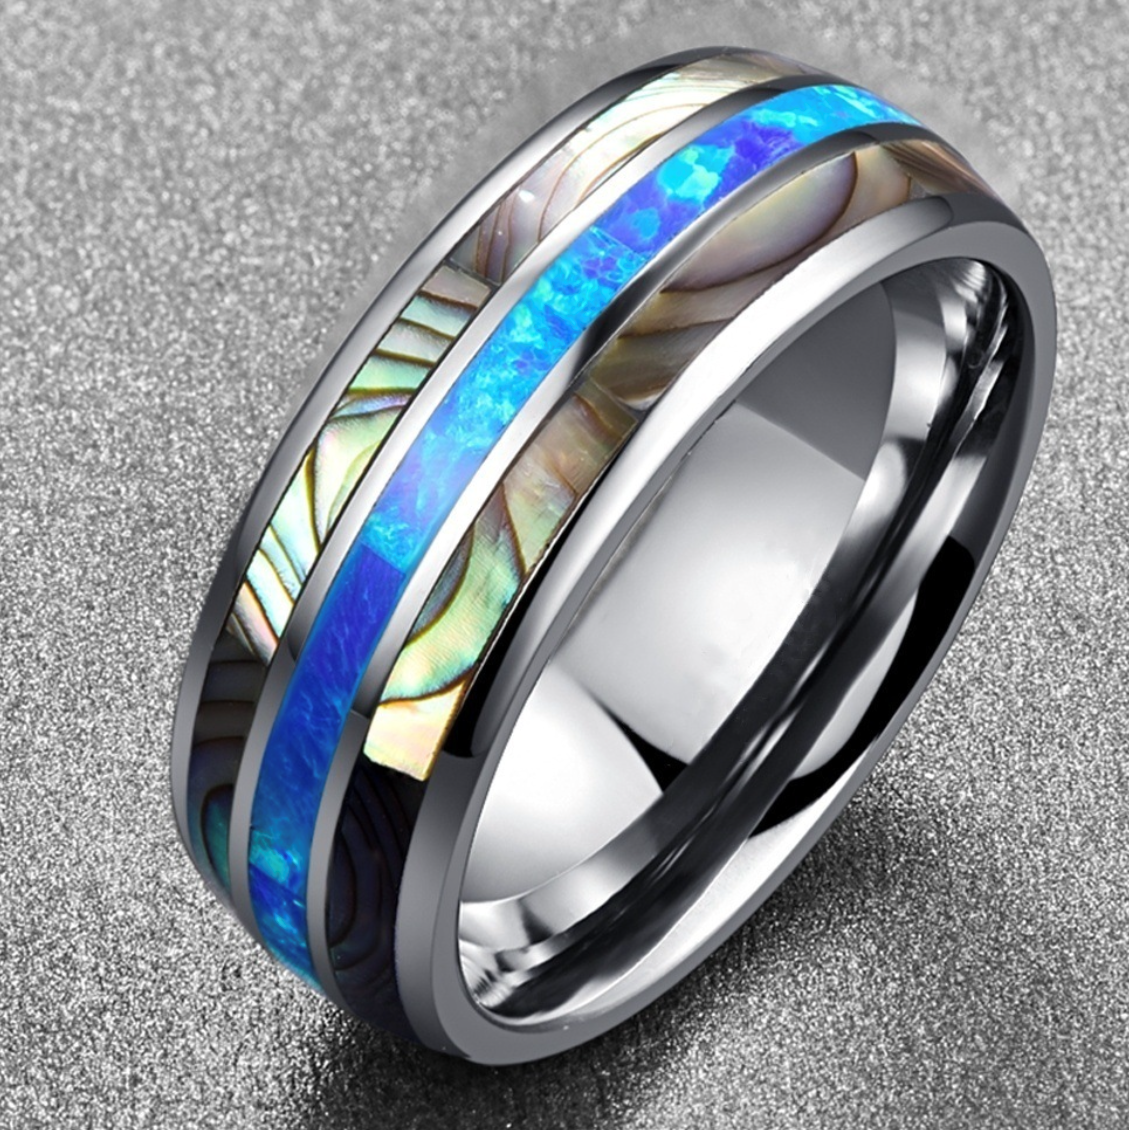 birthday gift a special jewelry piece Signet ring Tungsten steel ring Polished to a mirror-like shine